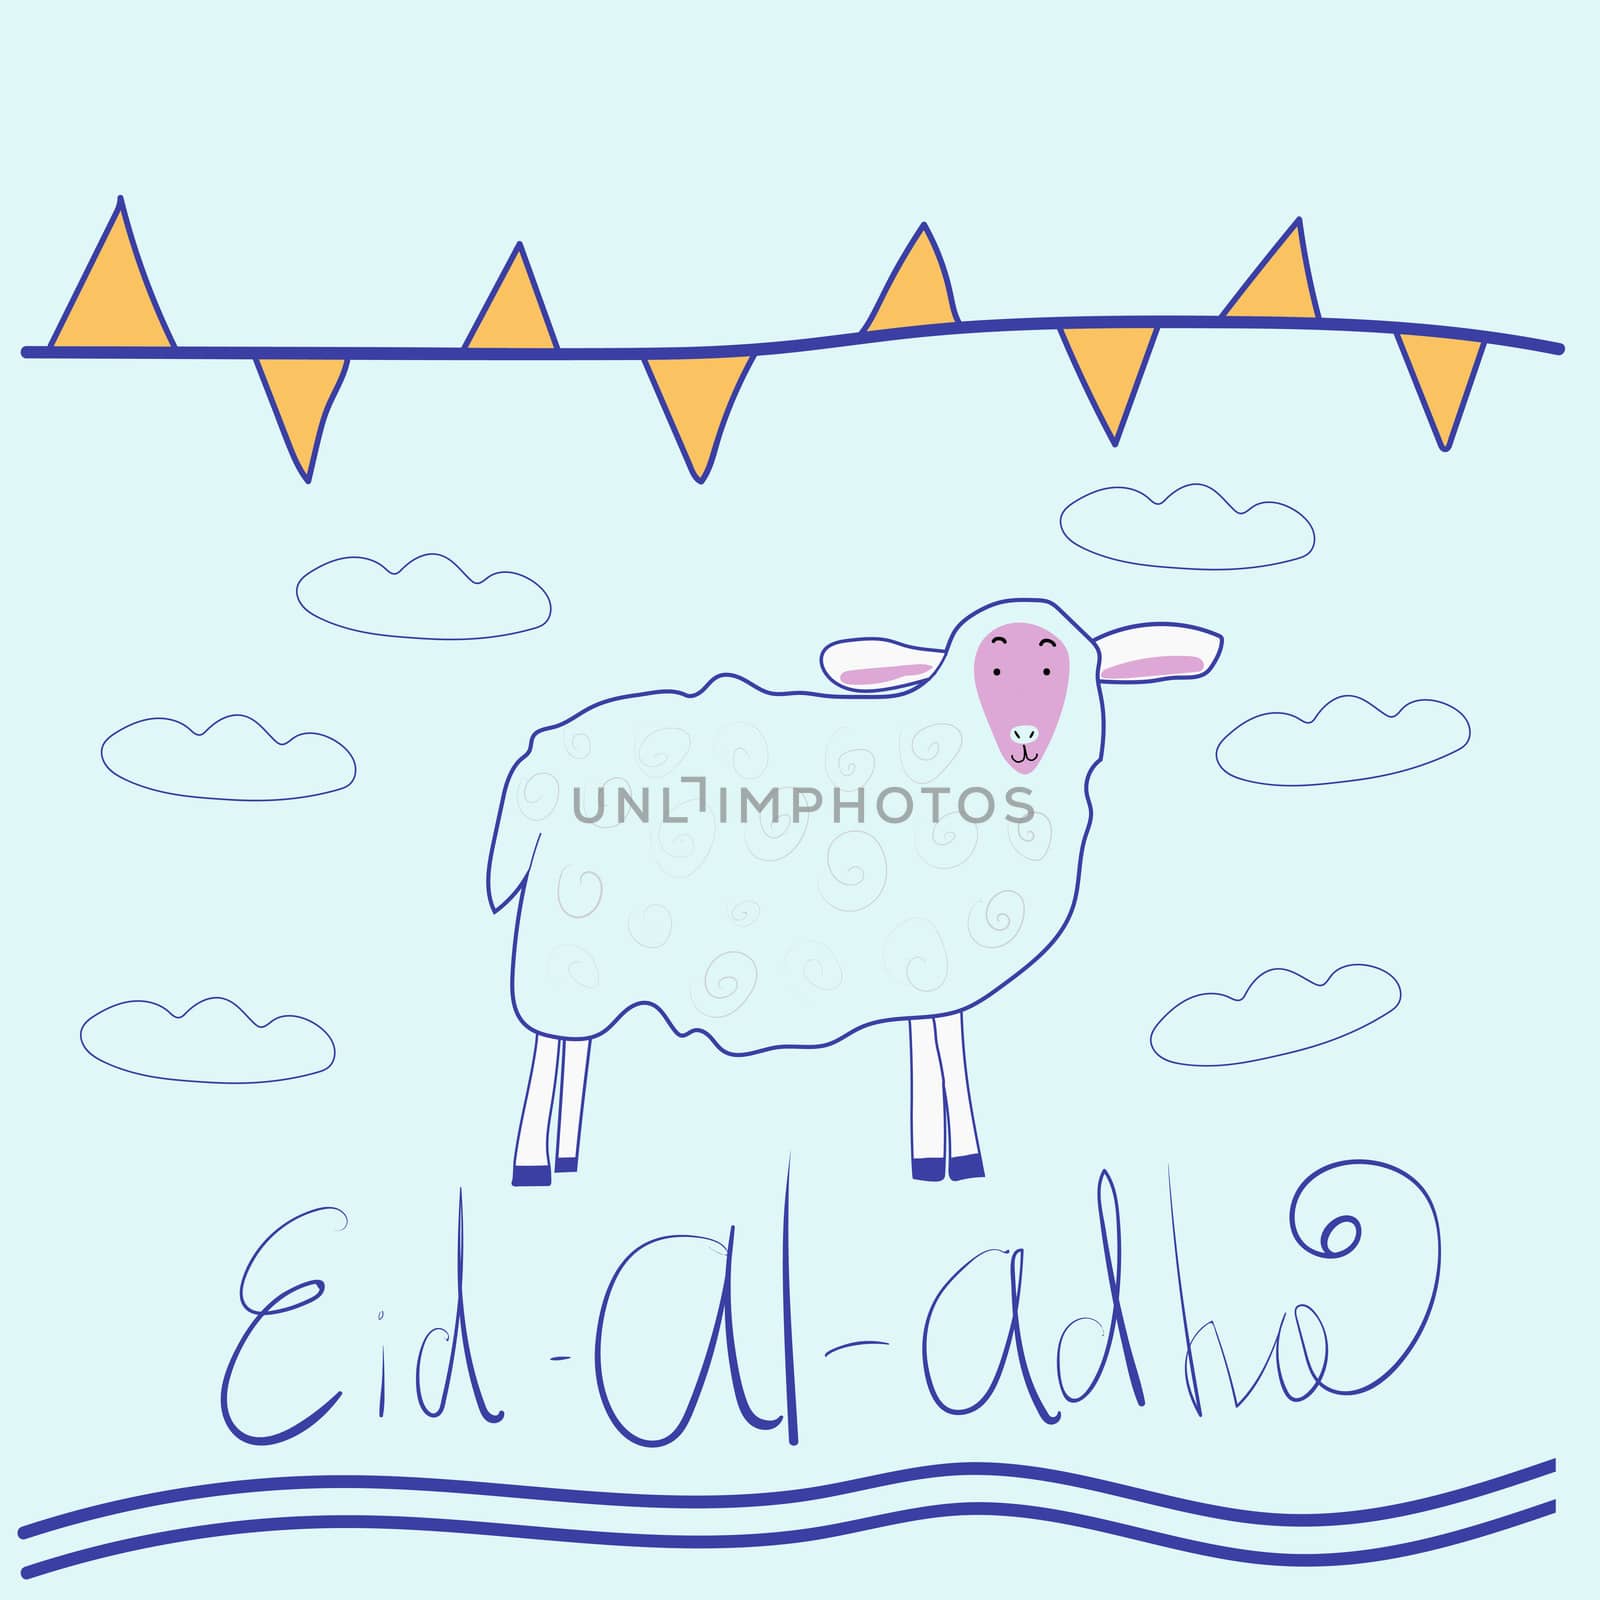 Eid ul adha greeting card with sheep, moon, star and flags, muslim community festival of sacrifice. illustration in style doodle. Islamic holiday